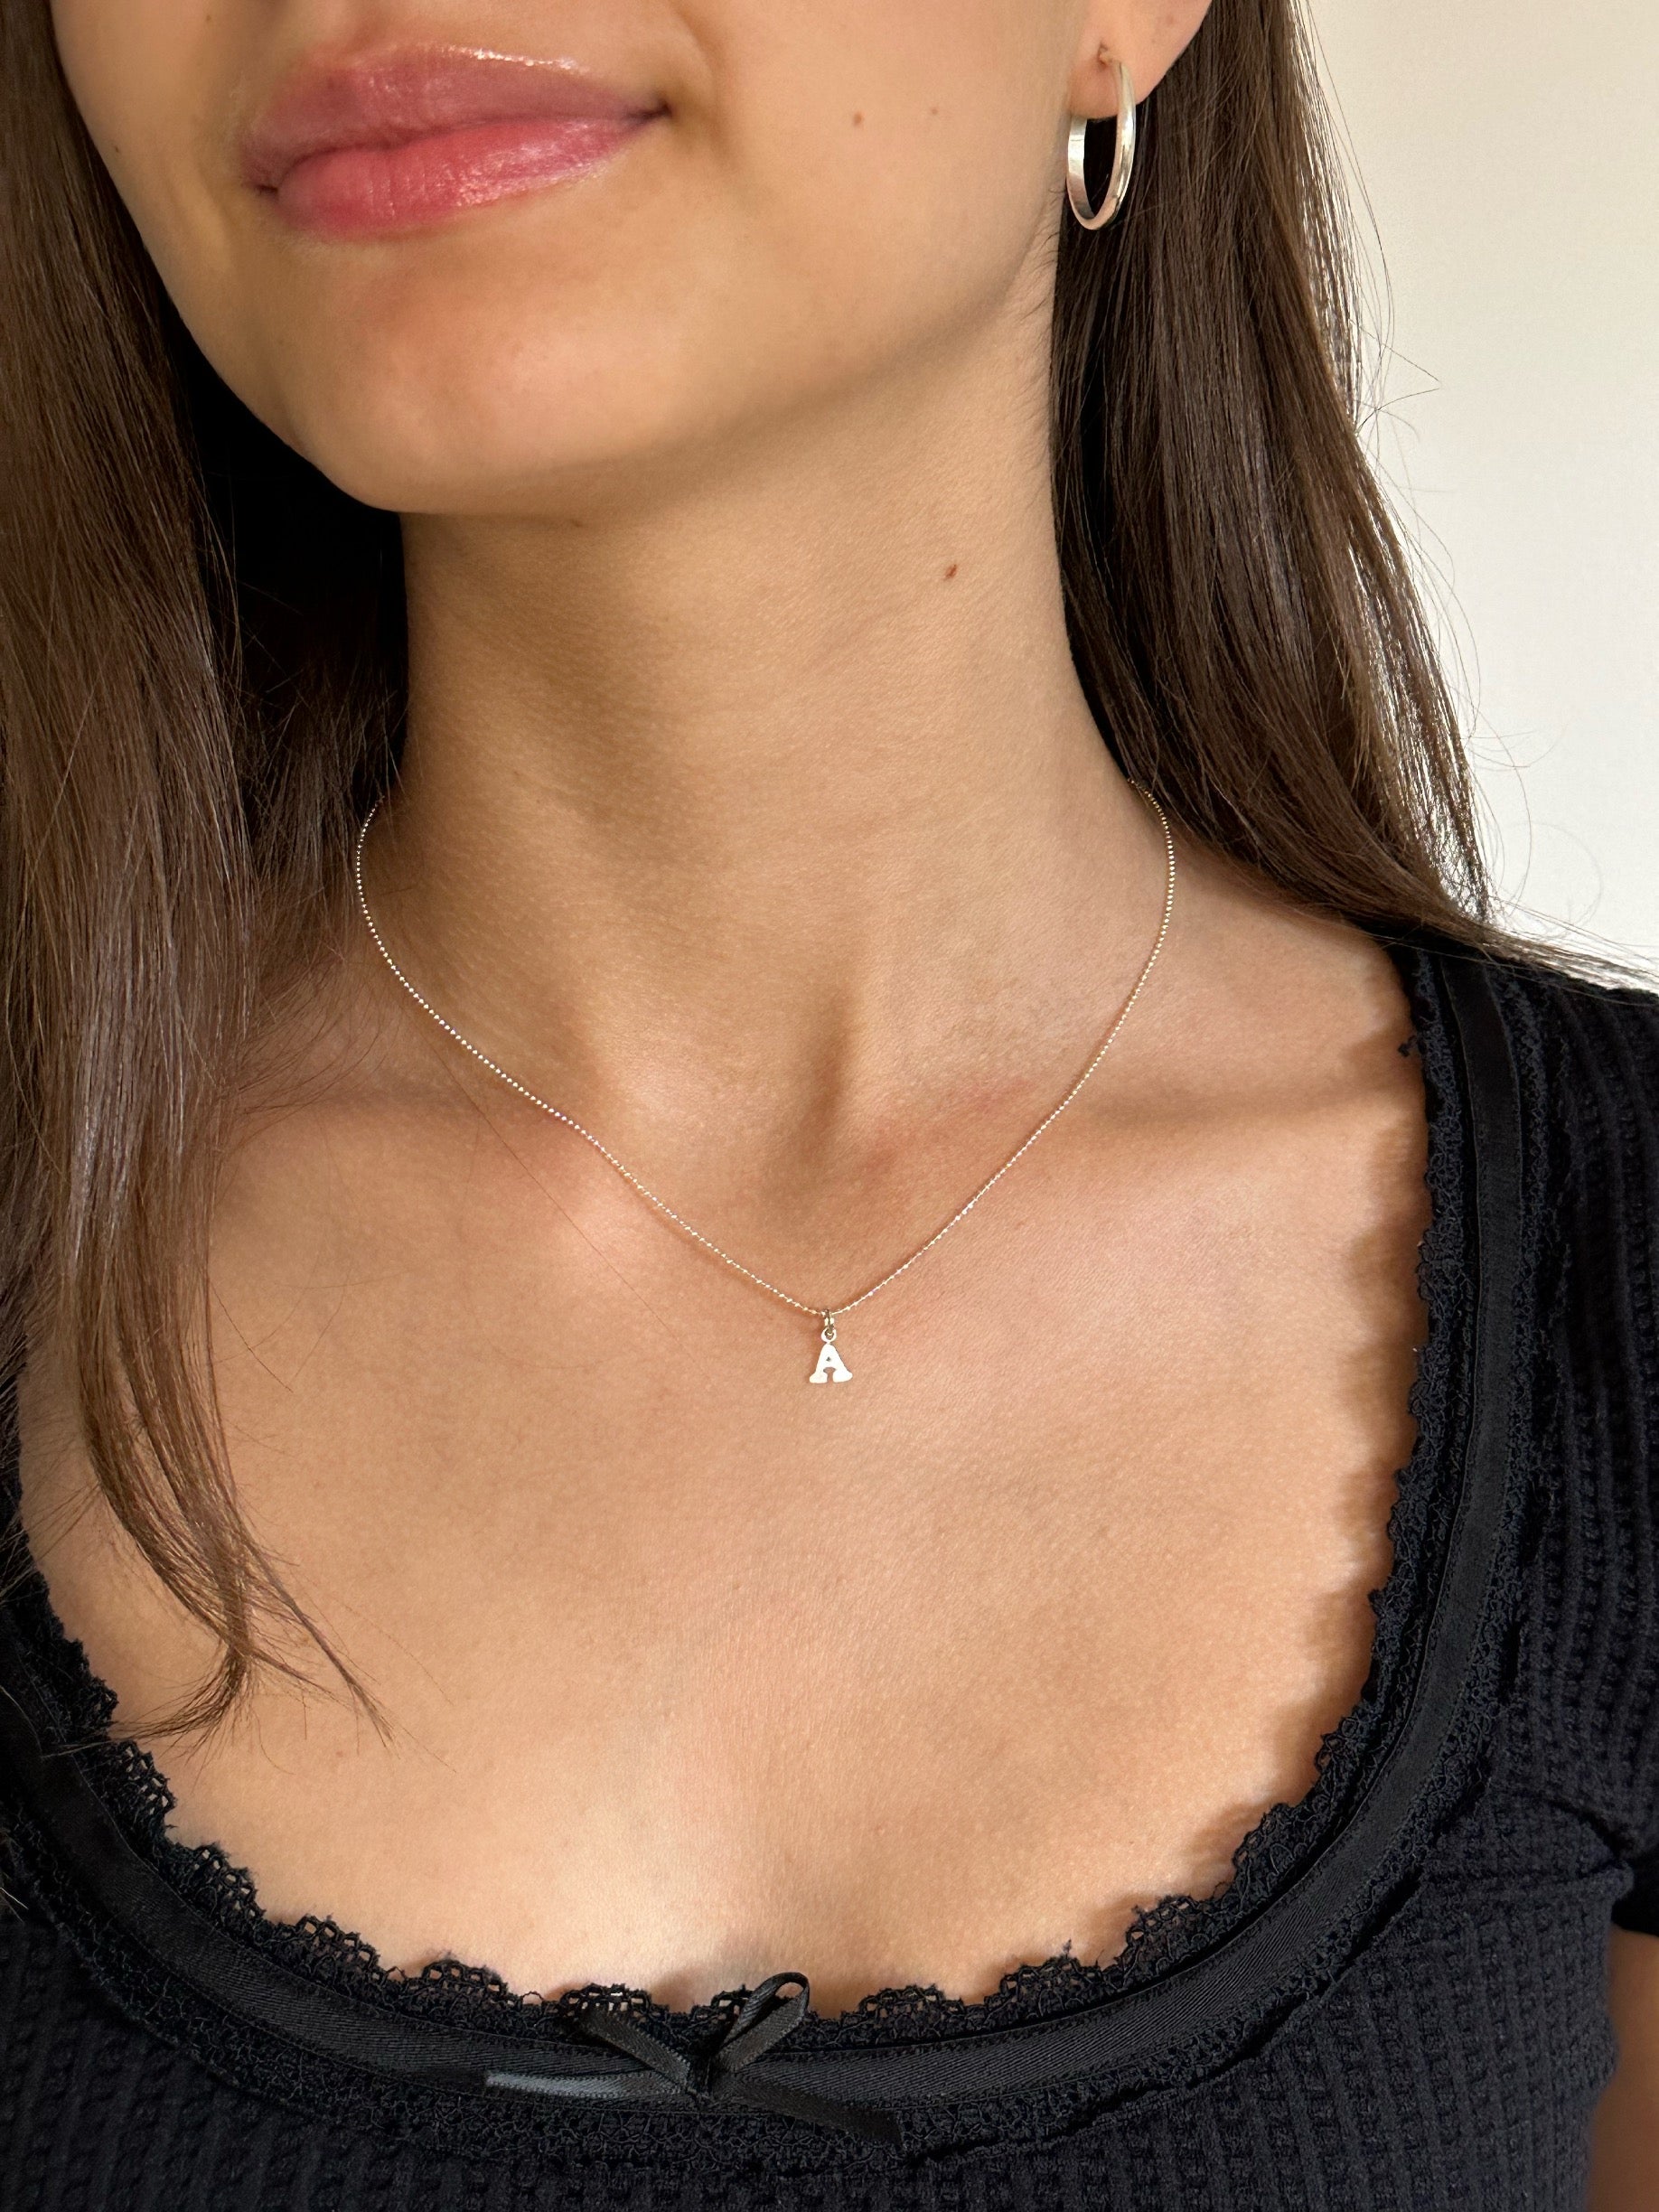 Buy Sterling Silver Cubic Zirconia Pendant Necklace. Small Simulated  Diamond. Round Cut, Faceted Zirconia Gemstone. Simple, Elegant Necklace.  Online in India - Etsy